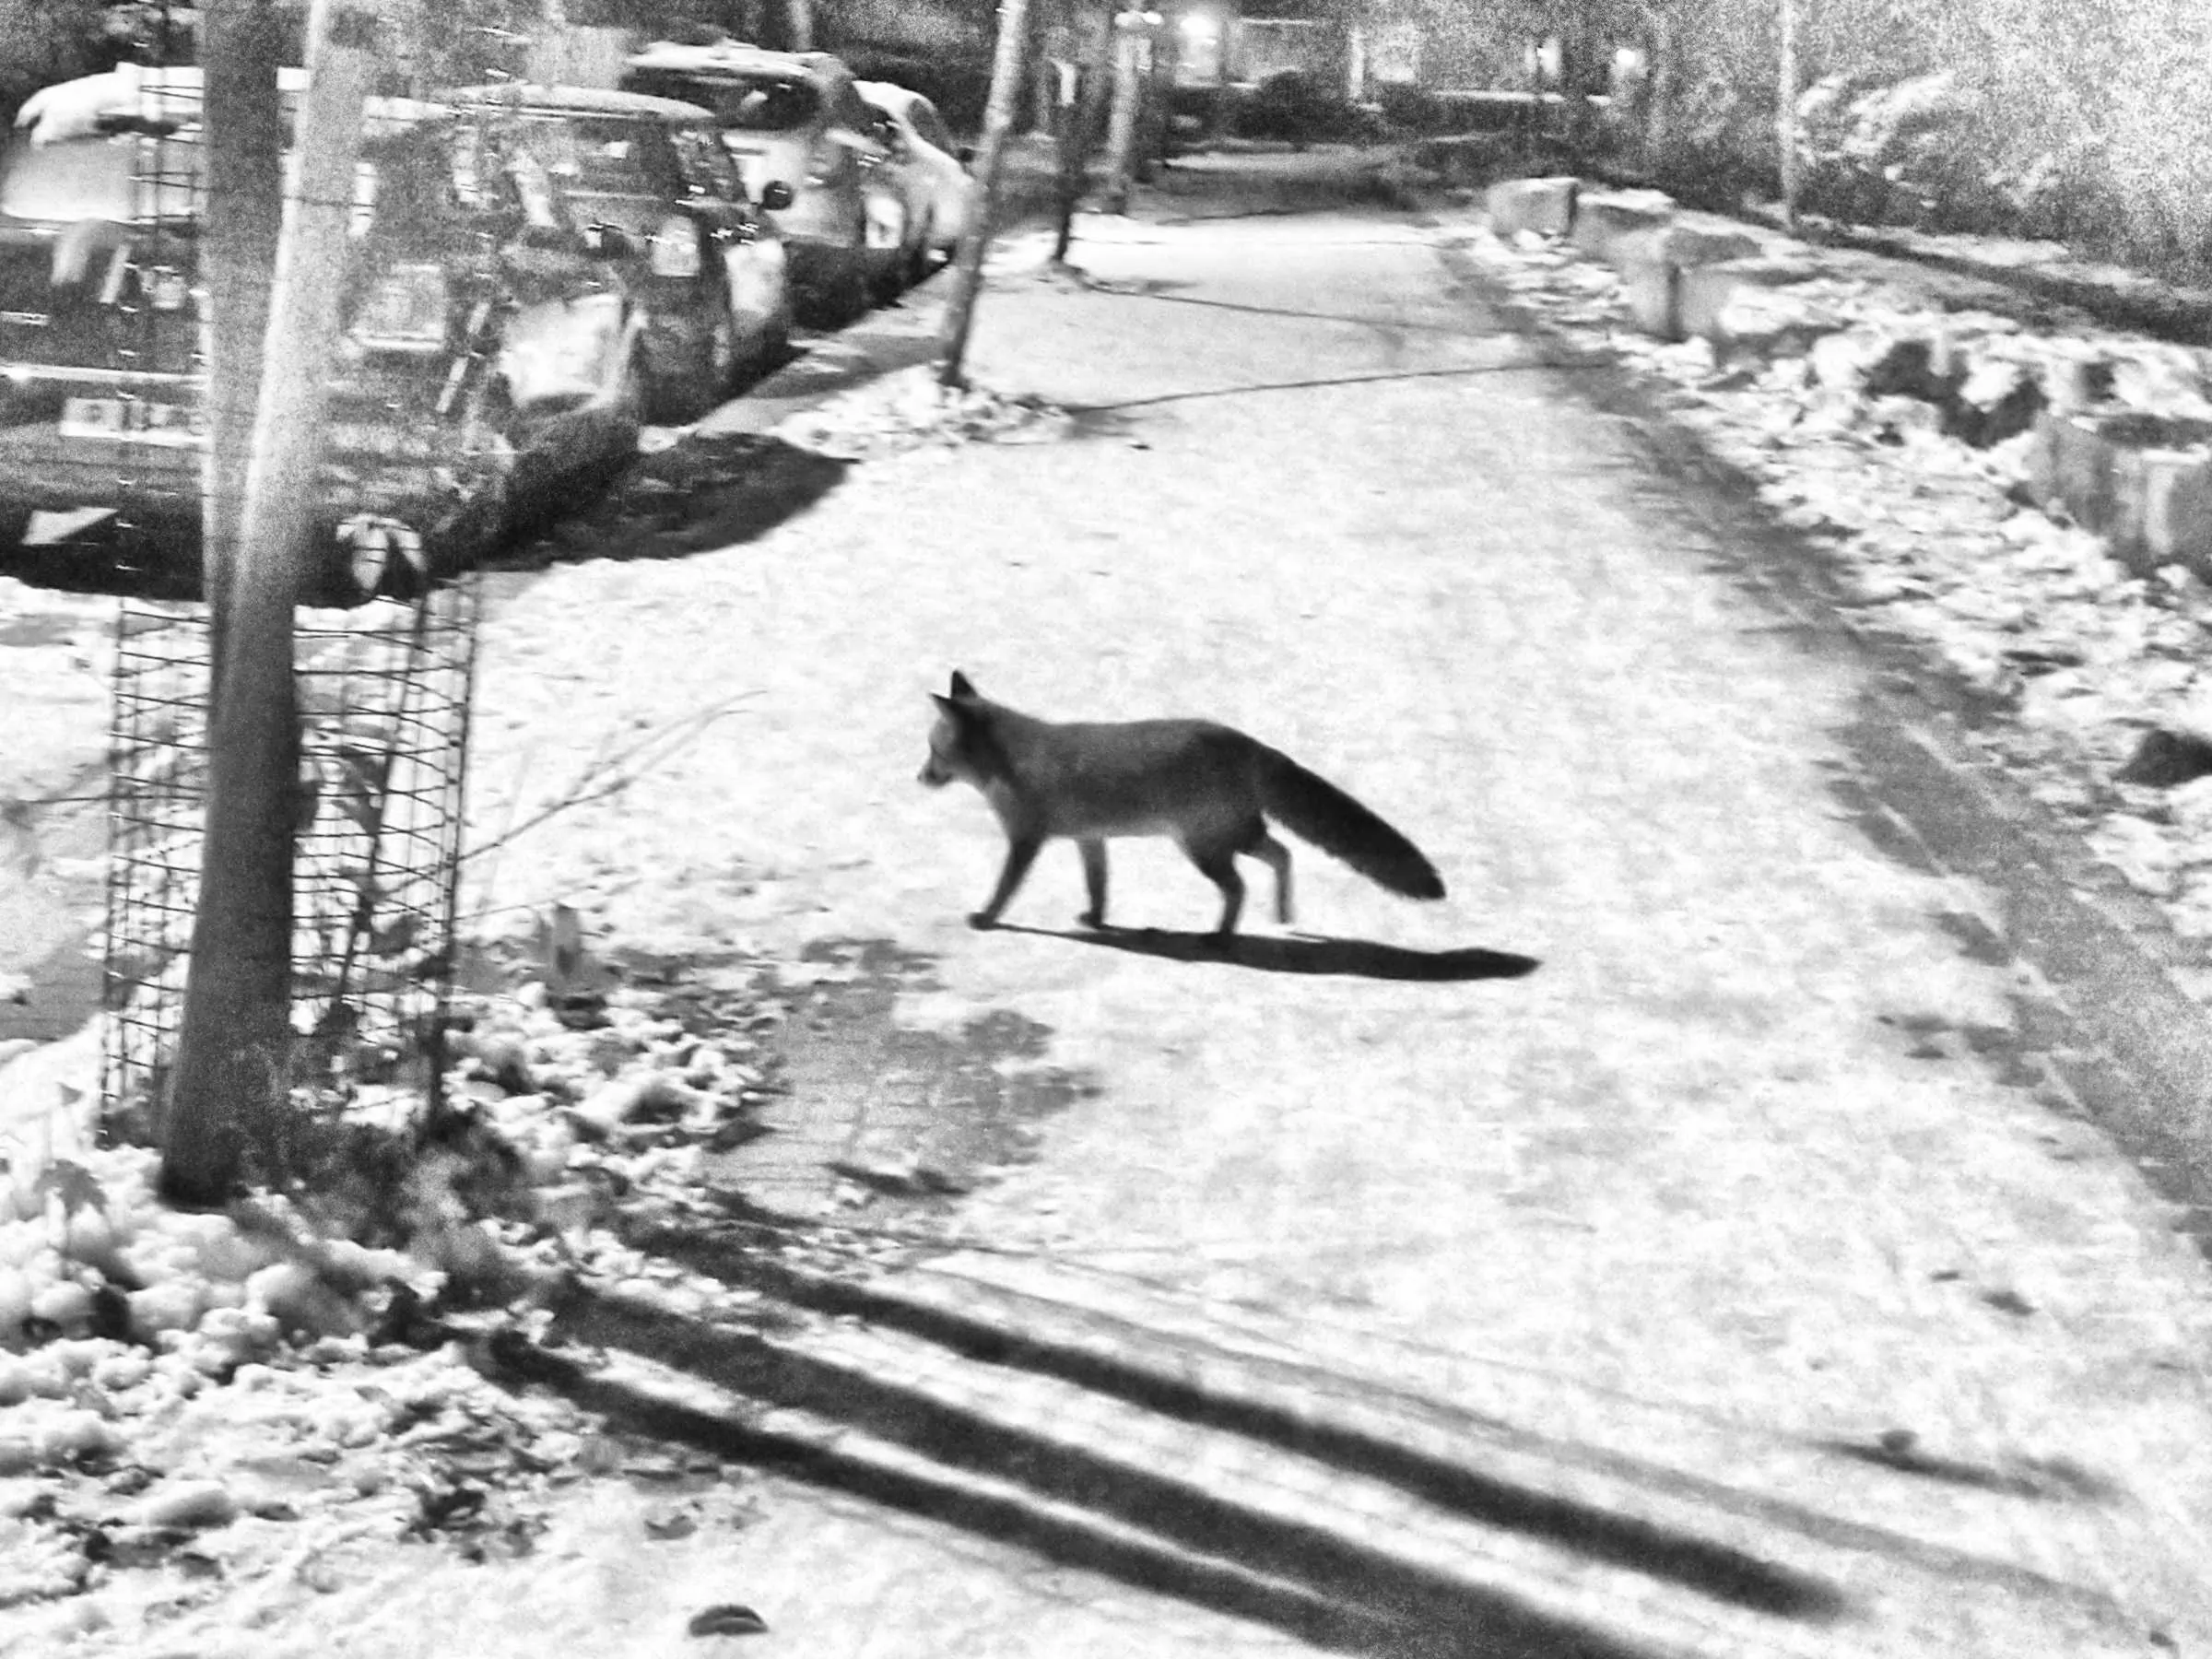 A fox strolls across a covered pavement towards a road on the left.
There are cars parked on the left, and everything it covered in snow.